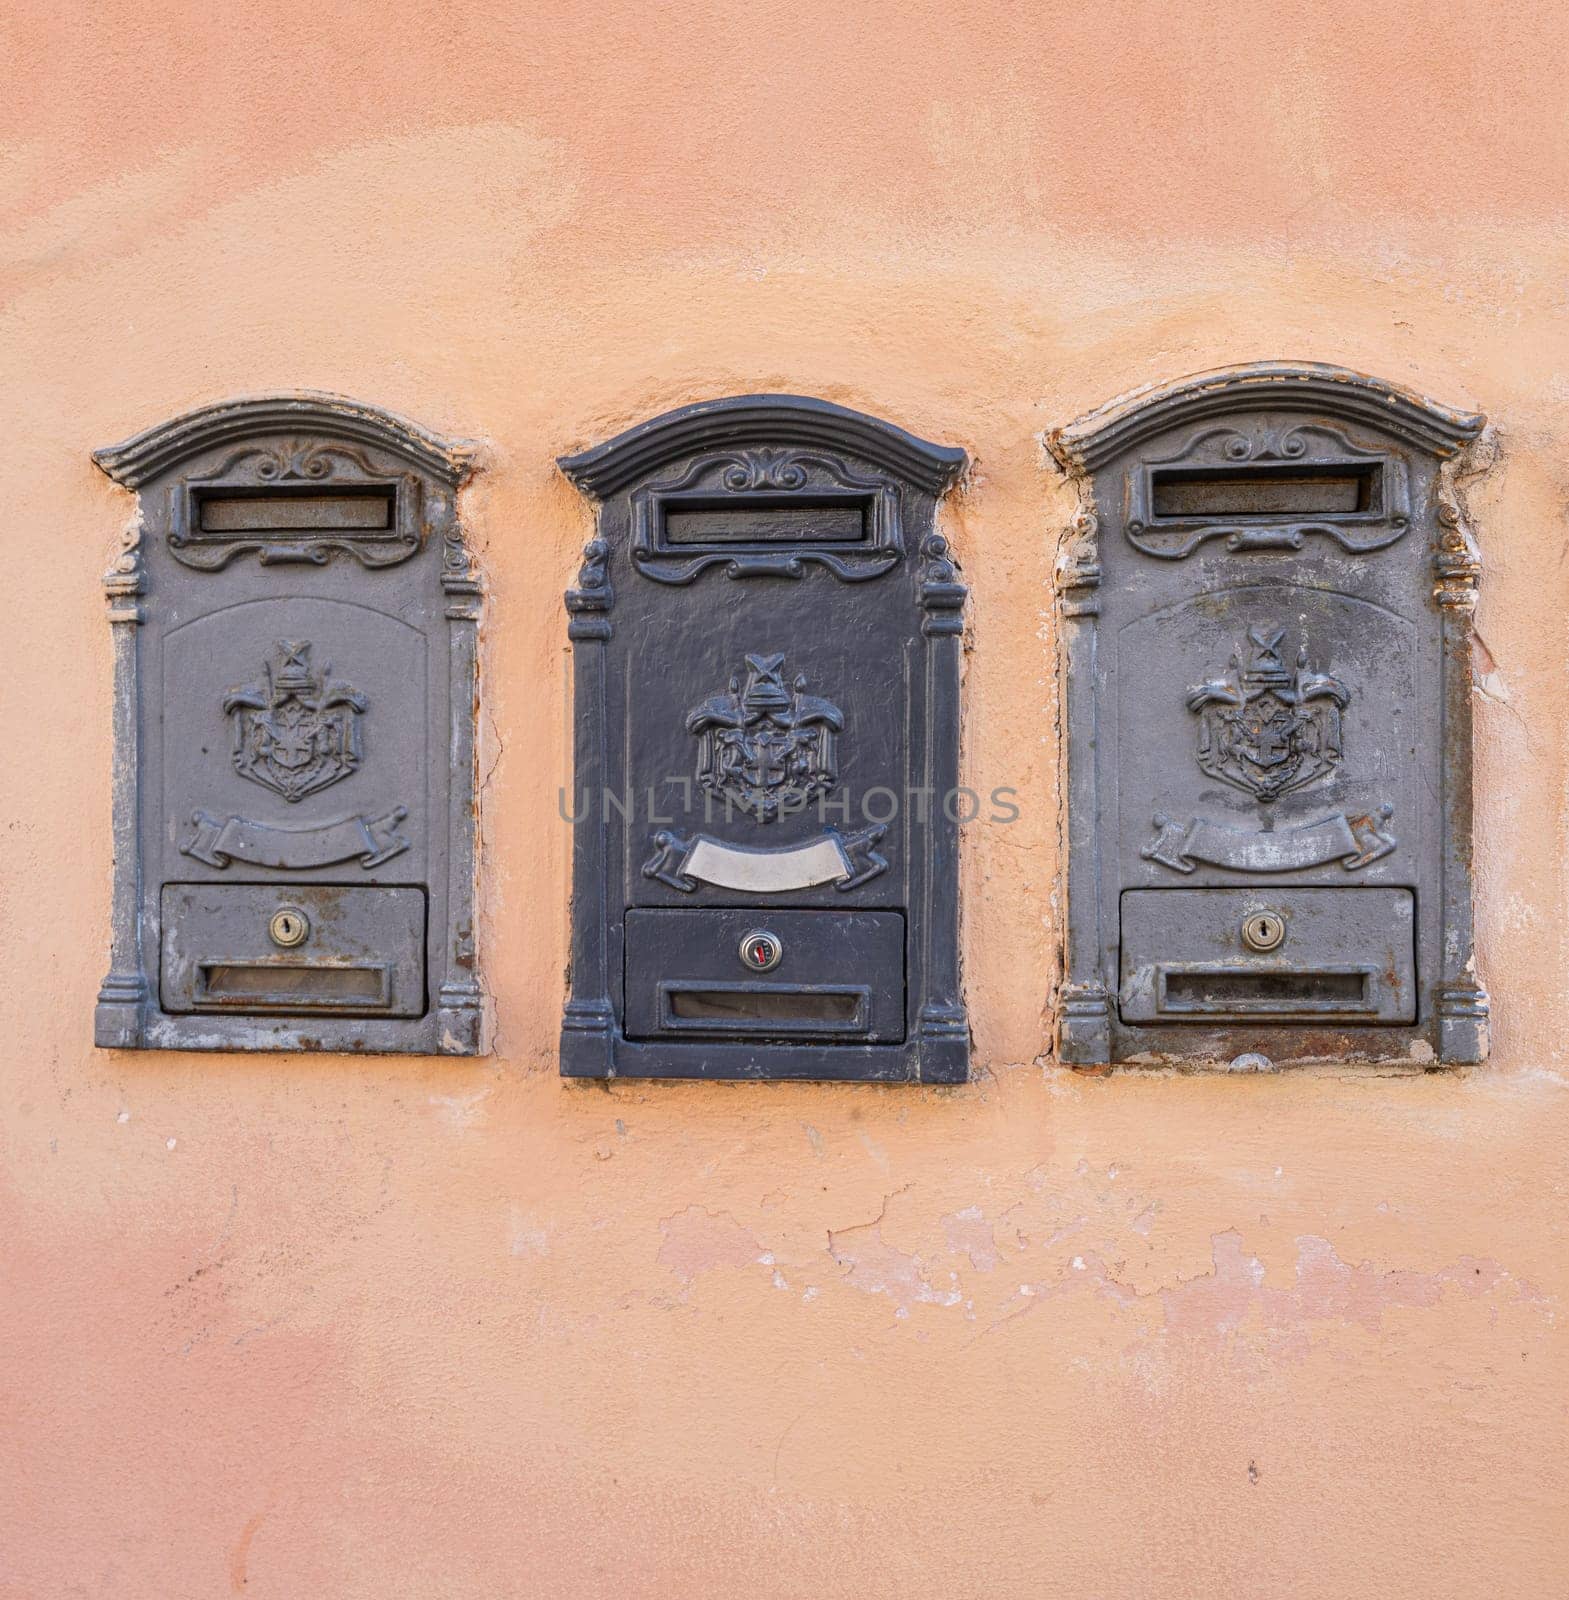 Ancient italian letterboxes by sergiodv